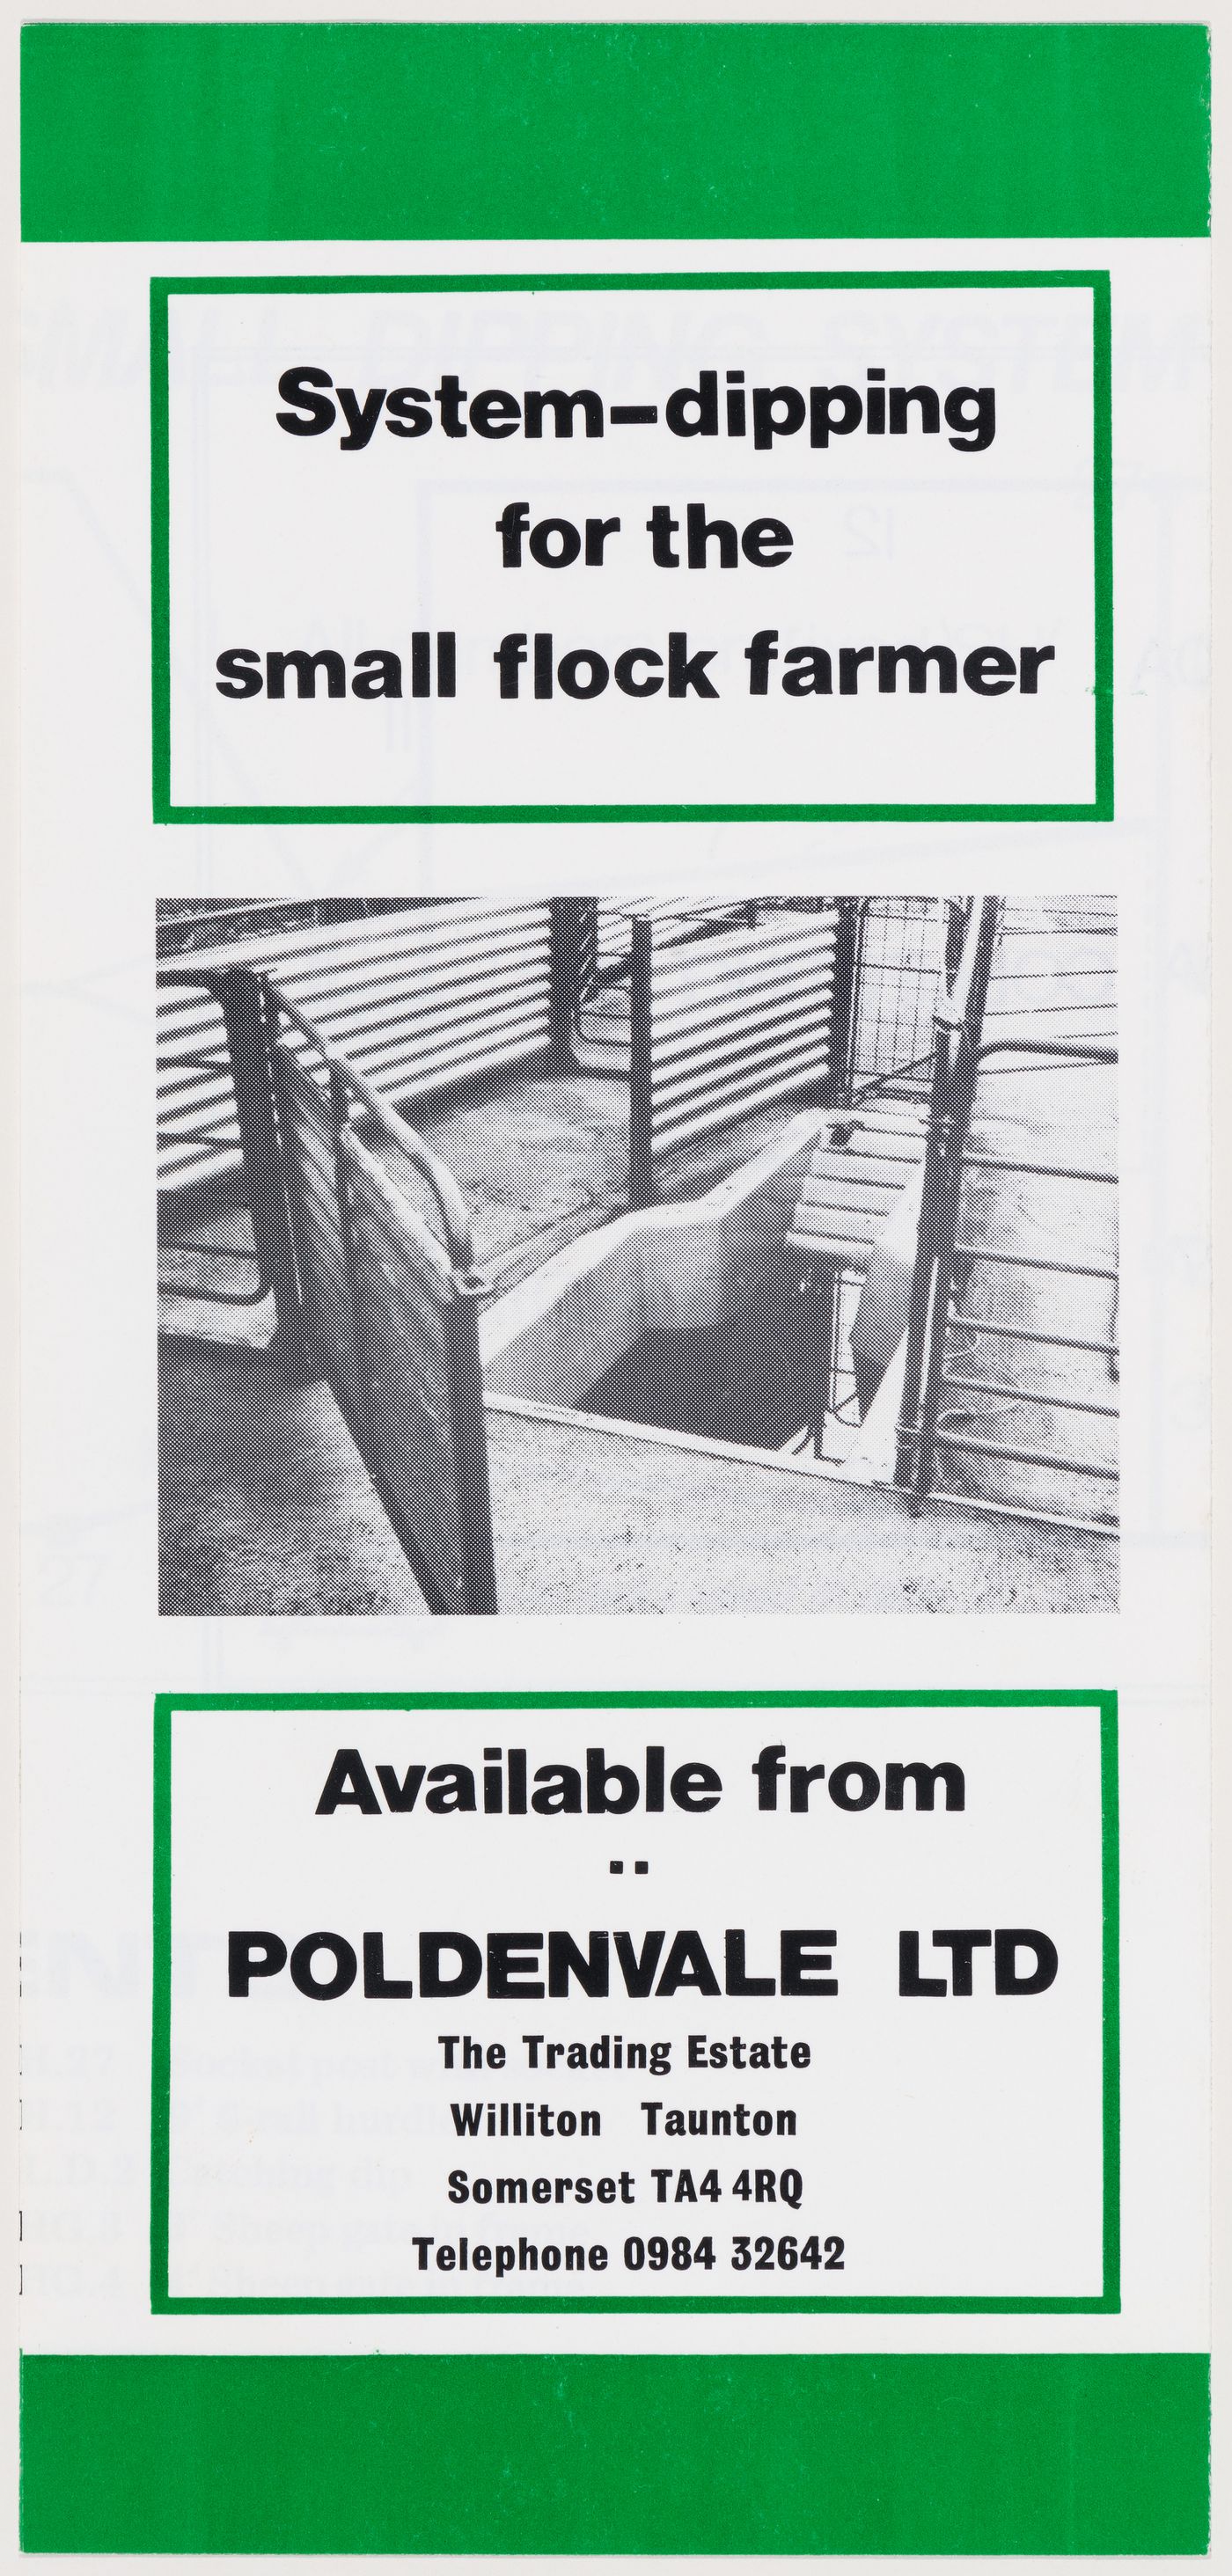 Leaflet about system-dipping for the small flock farmer, from the project file "Westpen"